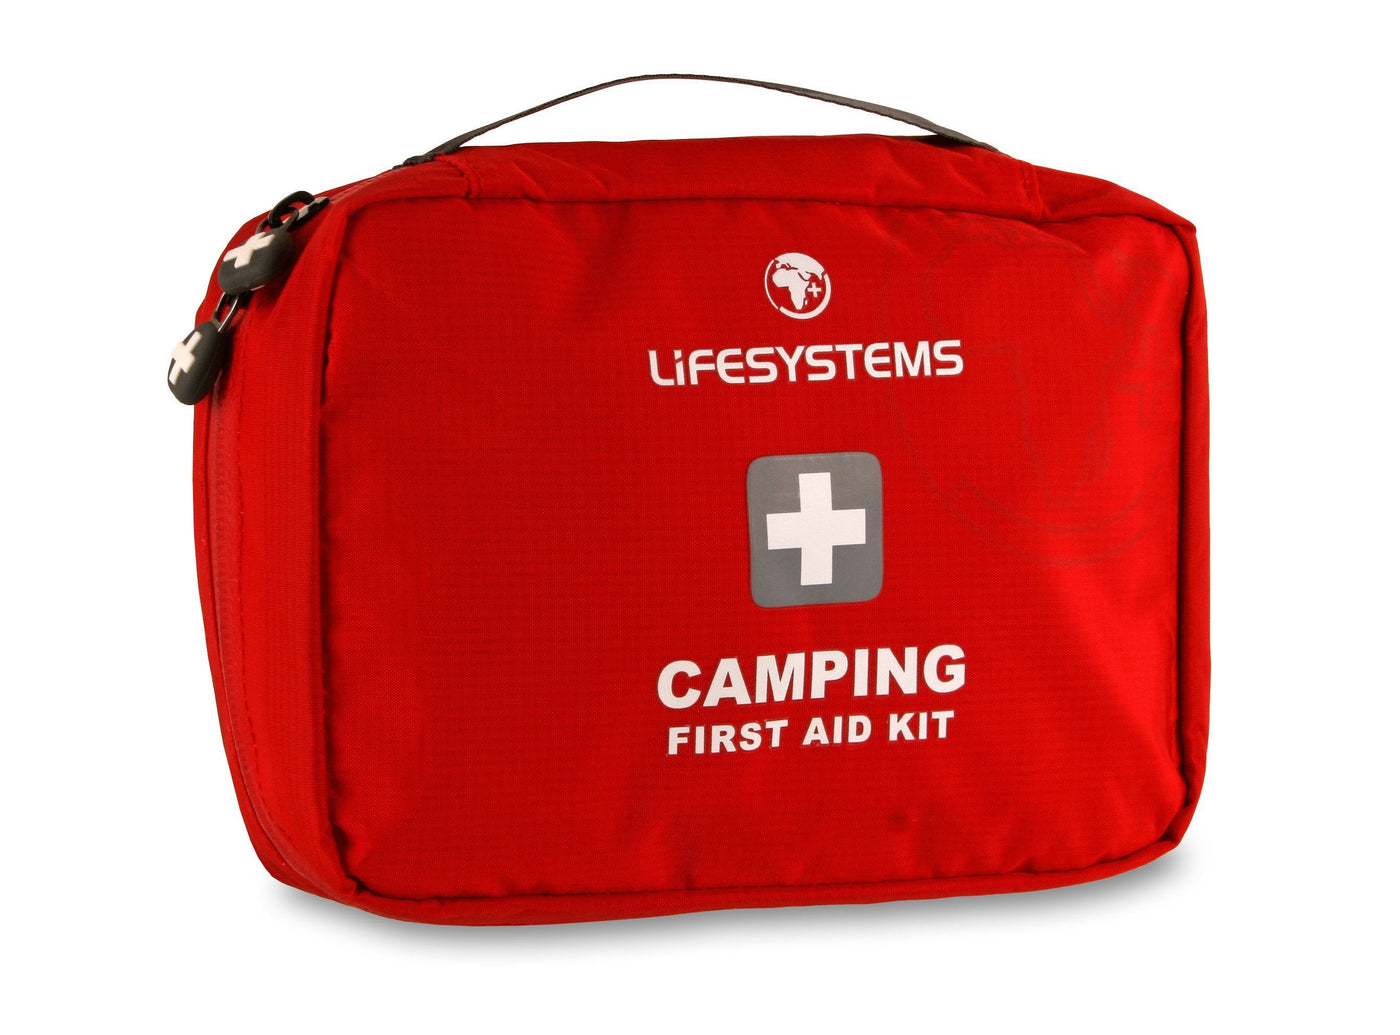 Lifesystems Camping First Aid Kit | Hiking and Camping Gear | NZ